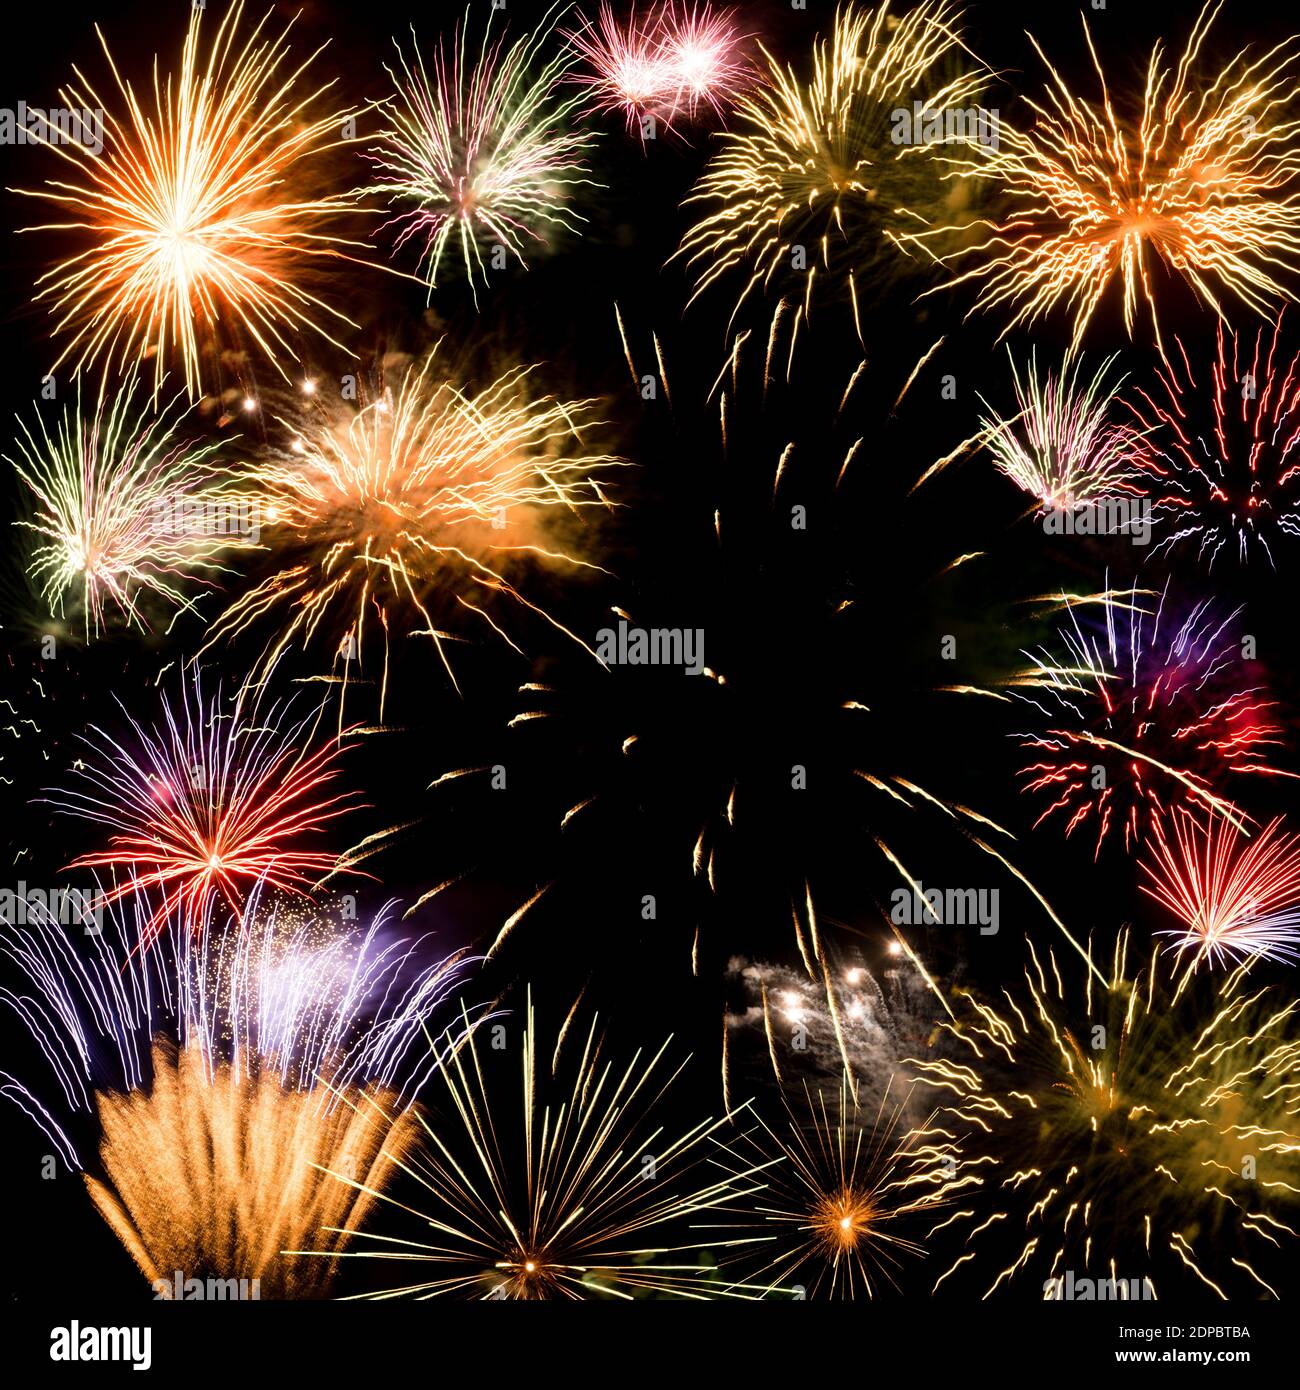 New Year fireworks background, new year wishes concept Stock Photo